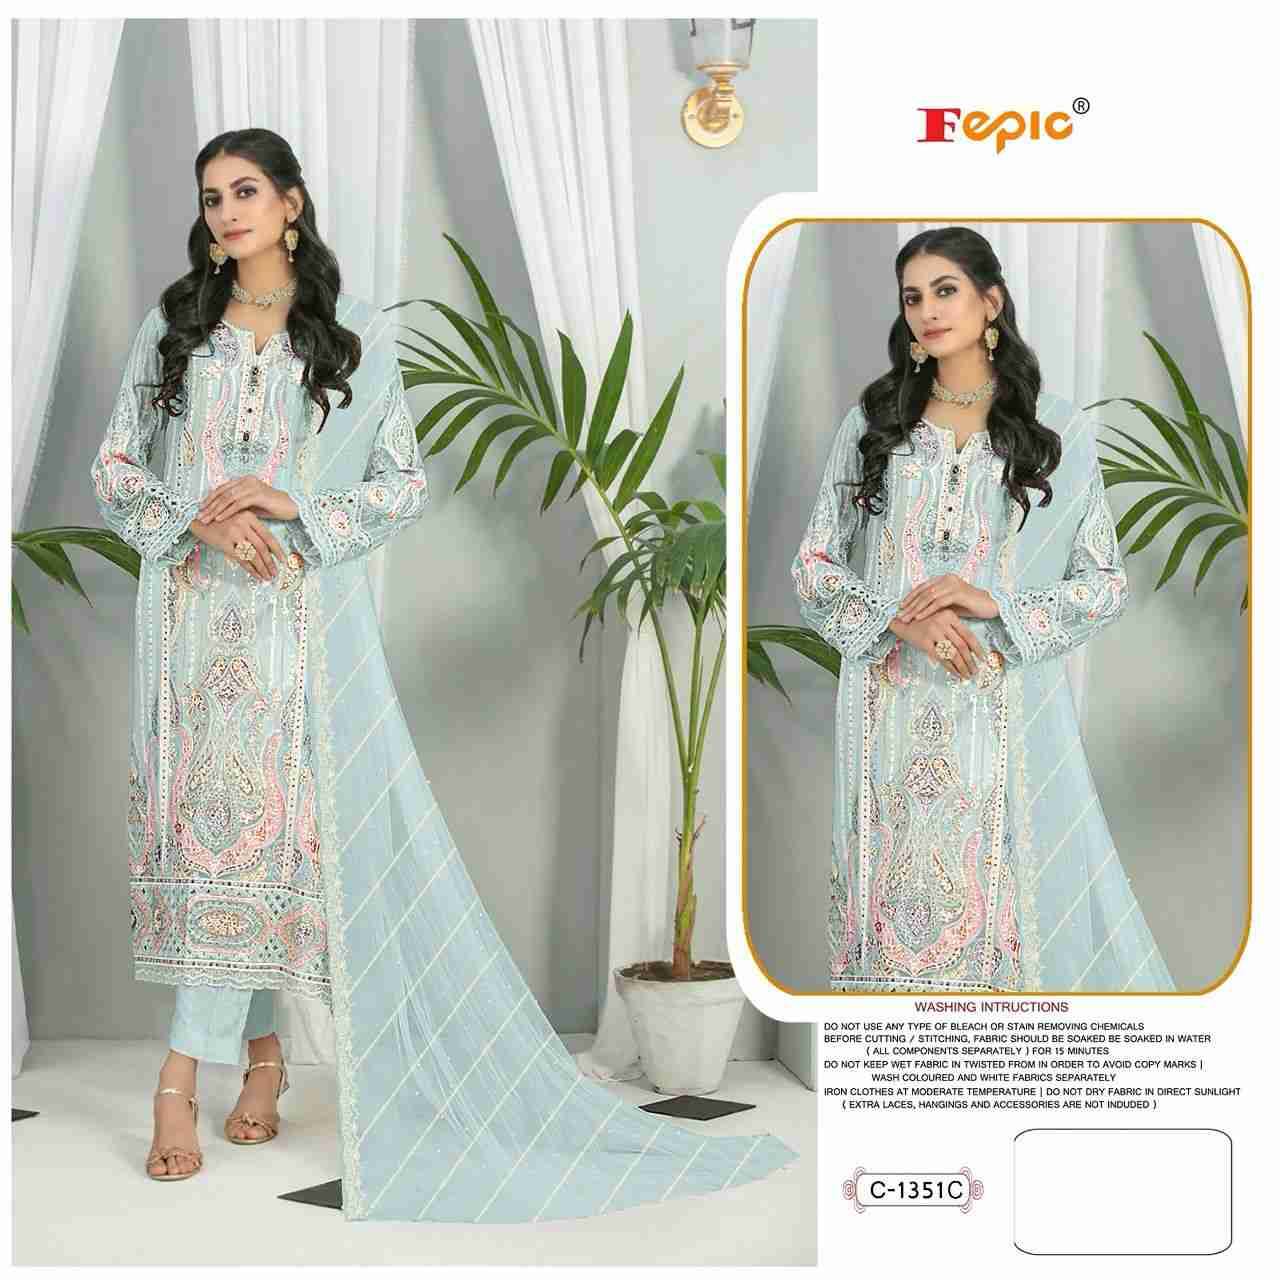 Fepic 1351 Colours By Fepic 1351-C To 1351-F Series Beautiful Pakistani Suits Stylish Fancy Colorful Party Wear & Occasional Wear Organza Embroidered Dresses At Wholesale Price